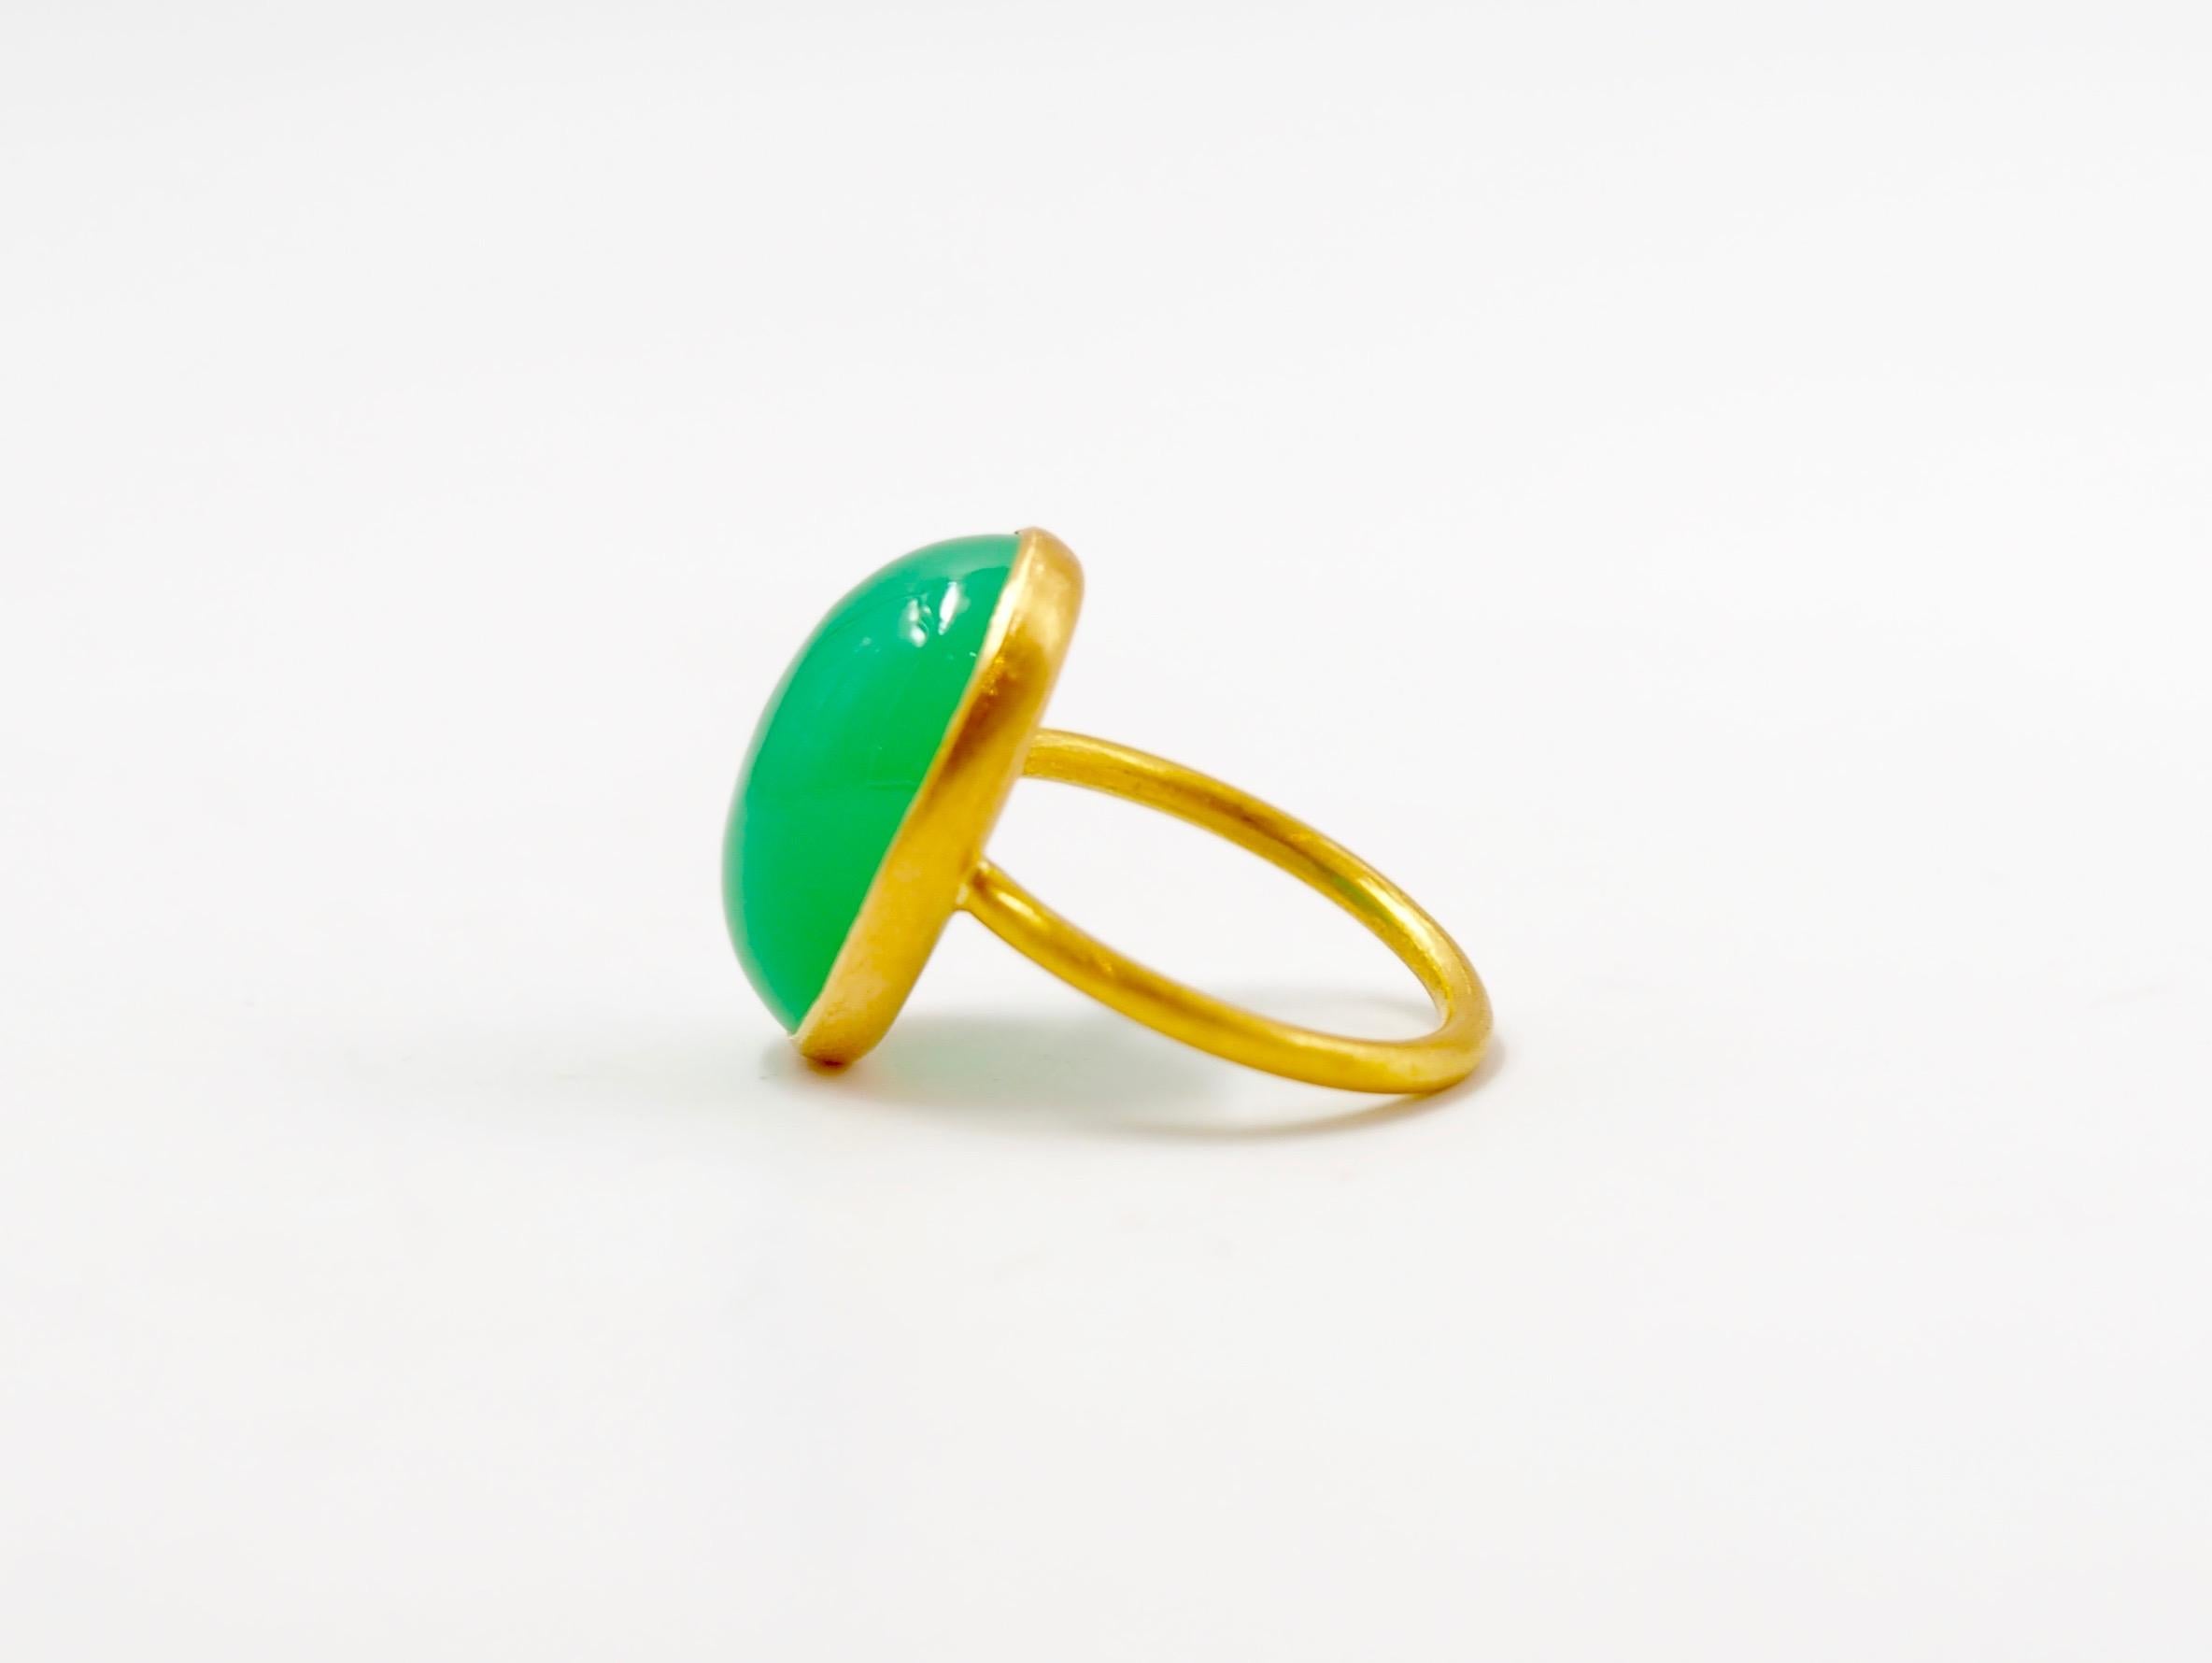 This simple ring by Scrives is composed of a large green chalcedony cabochon of 11.25 cts. 
The stone is set in a 22kt closed gold setting.
This chrysoprase is natural, not dyed and has natural & typical small inclusions.

This ring is handmade with